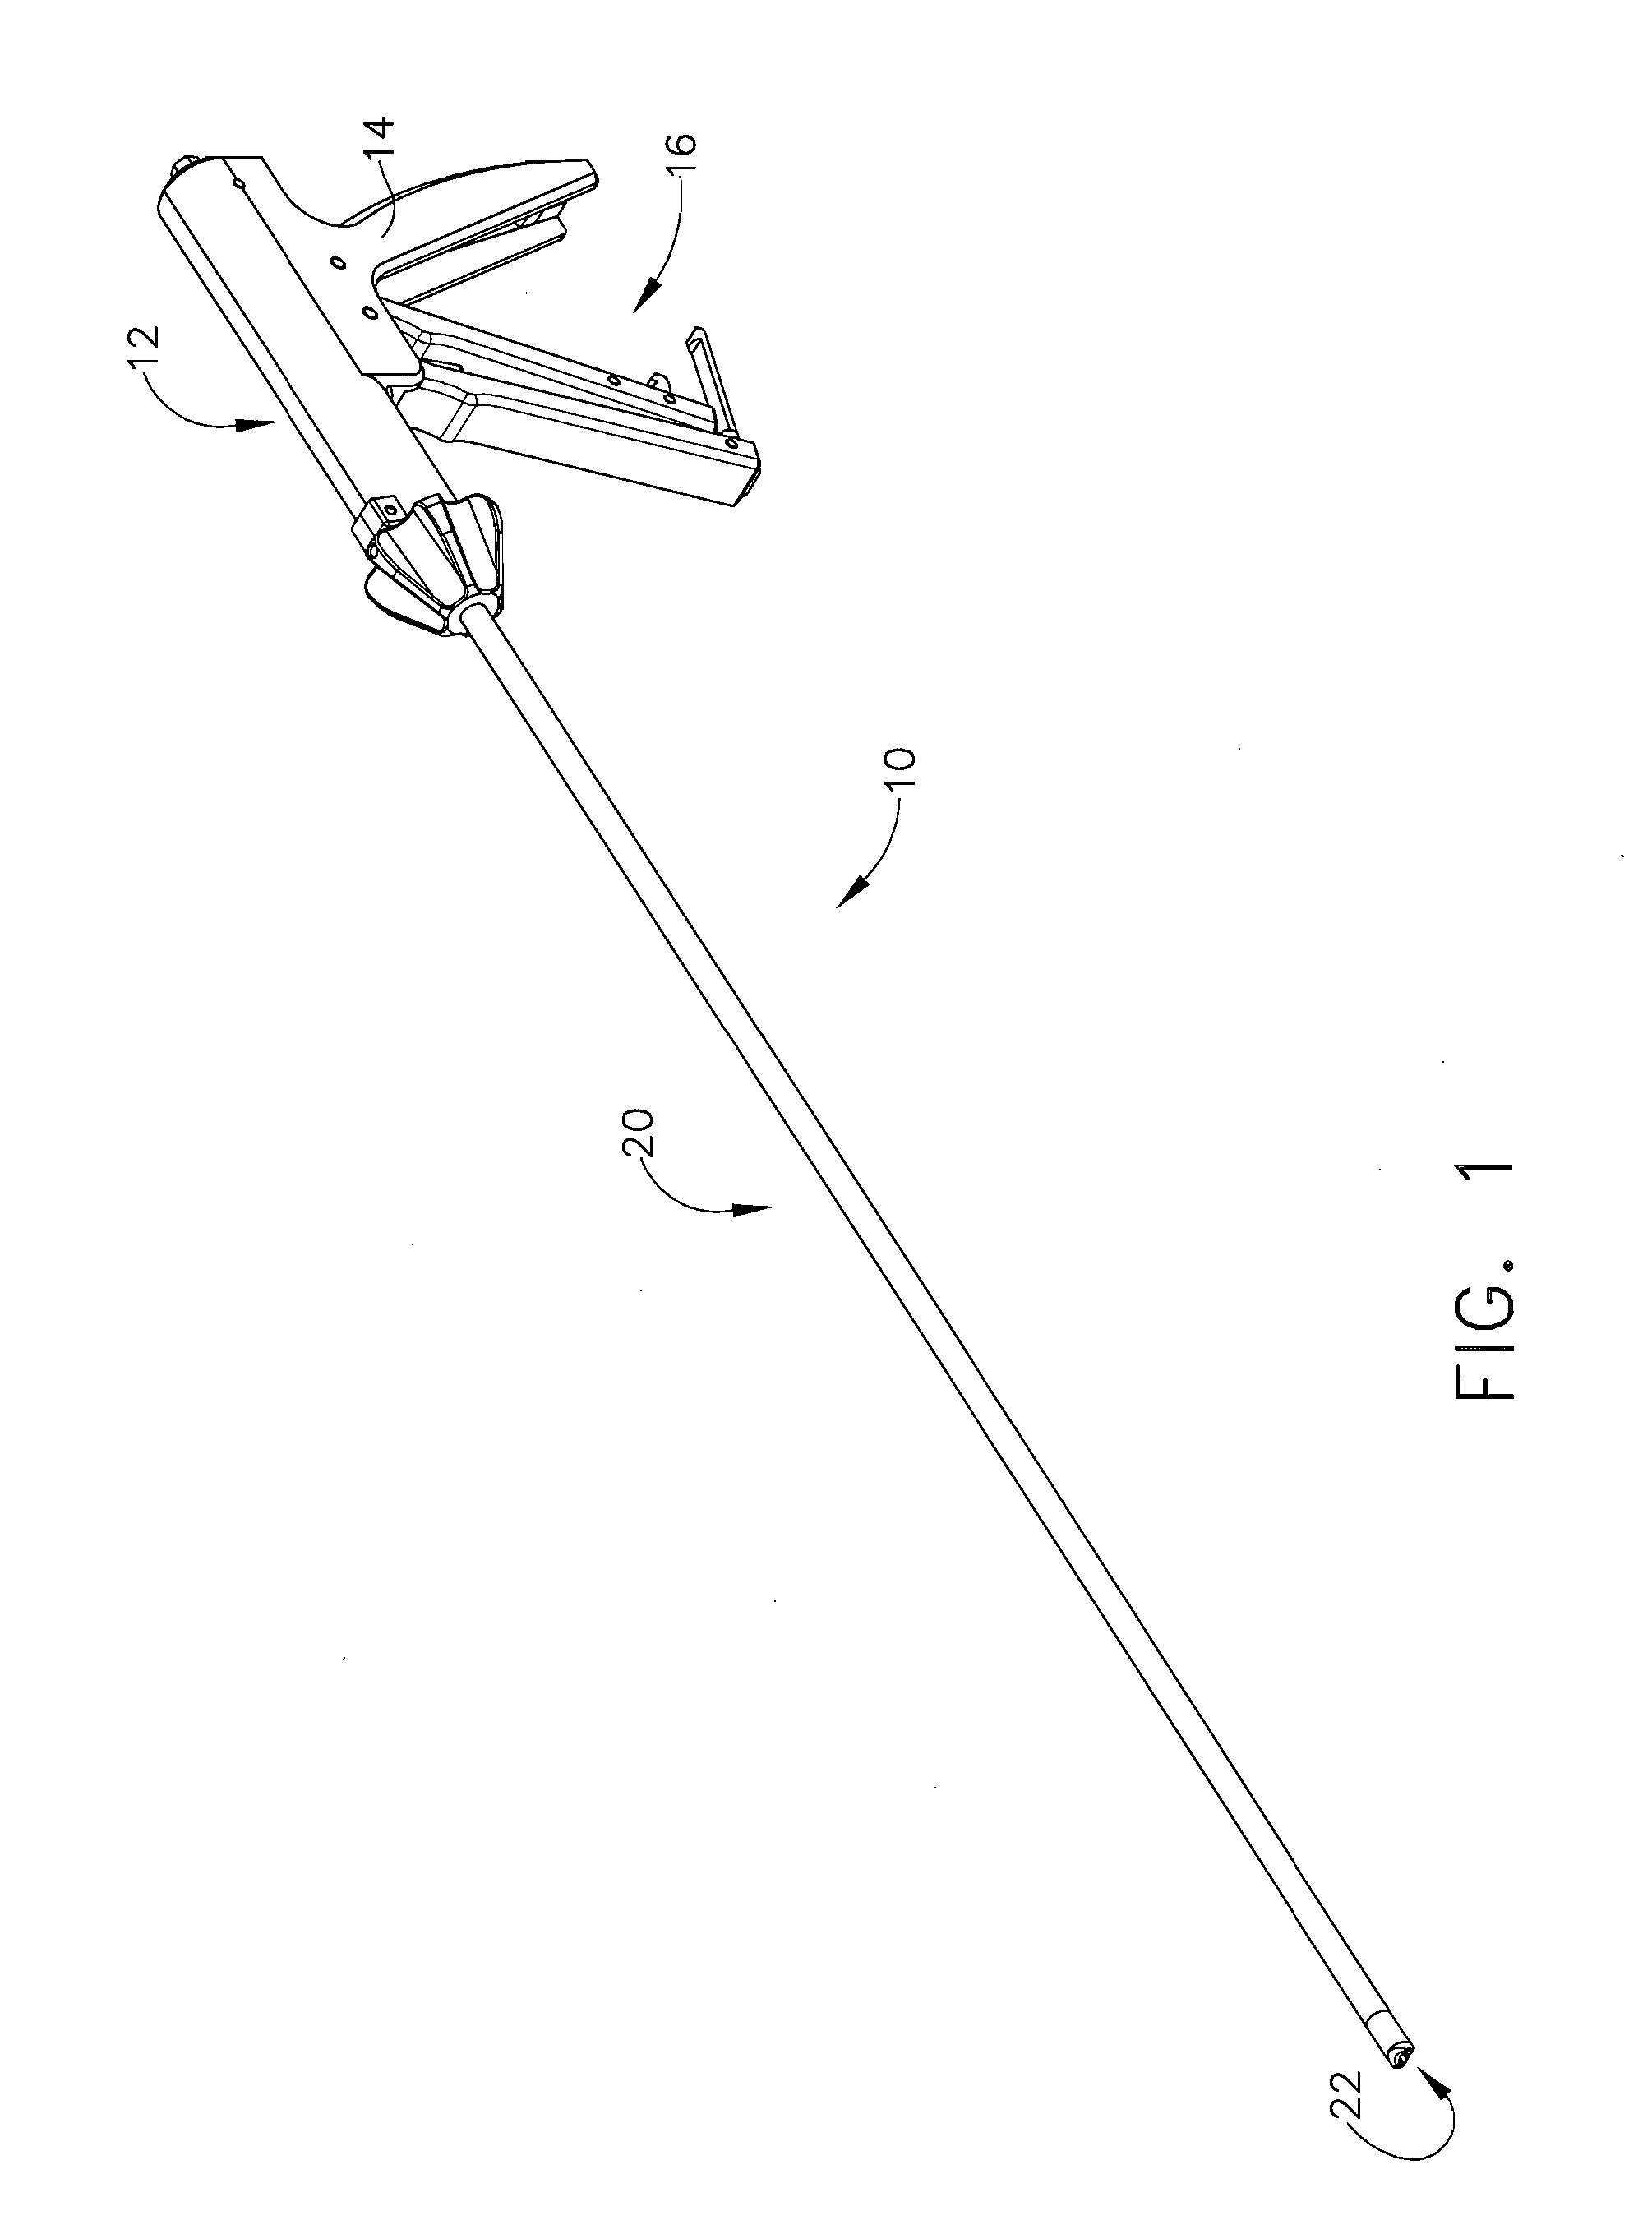 Method For Feeding Staples In a Low Profile Surgical Stapler